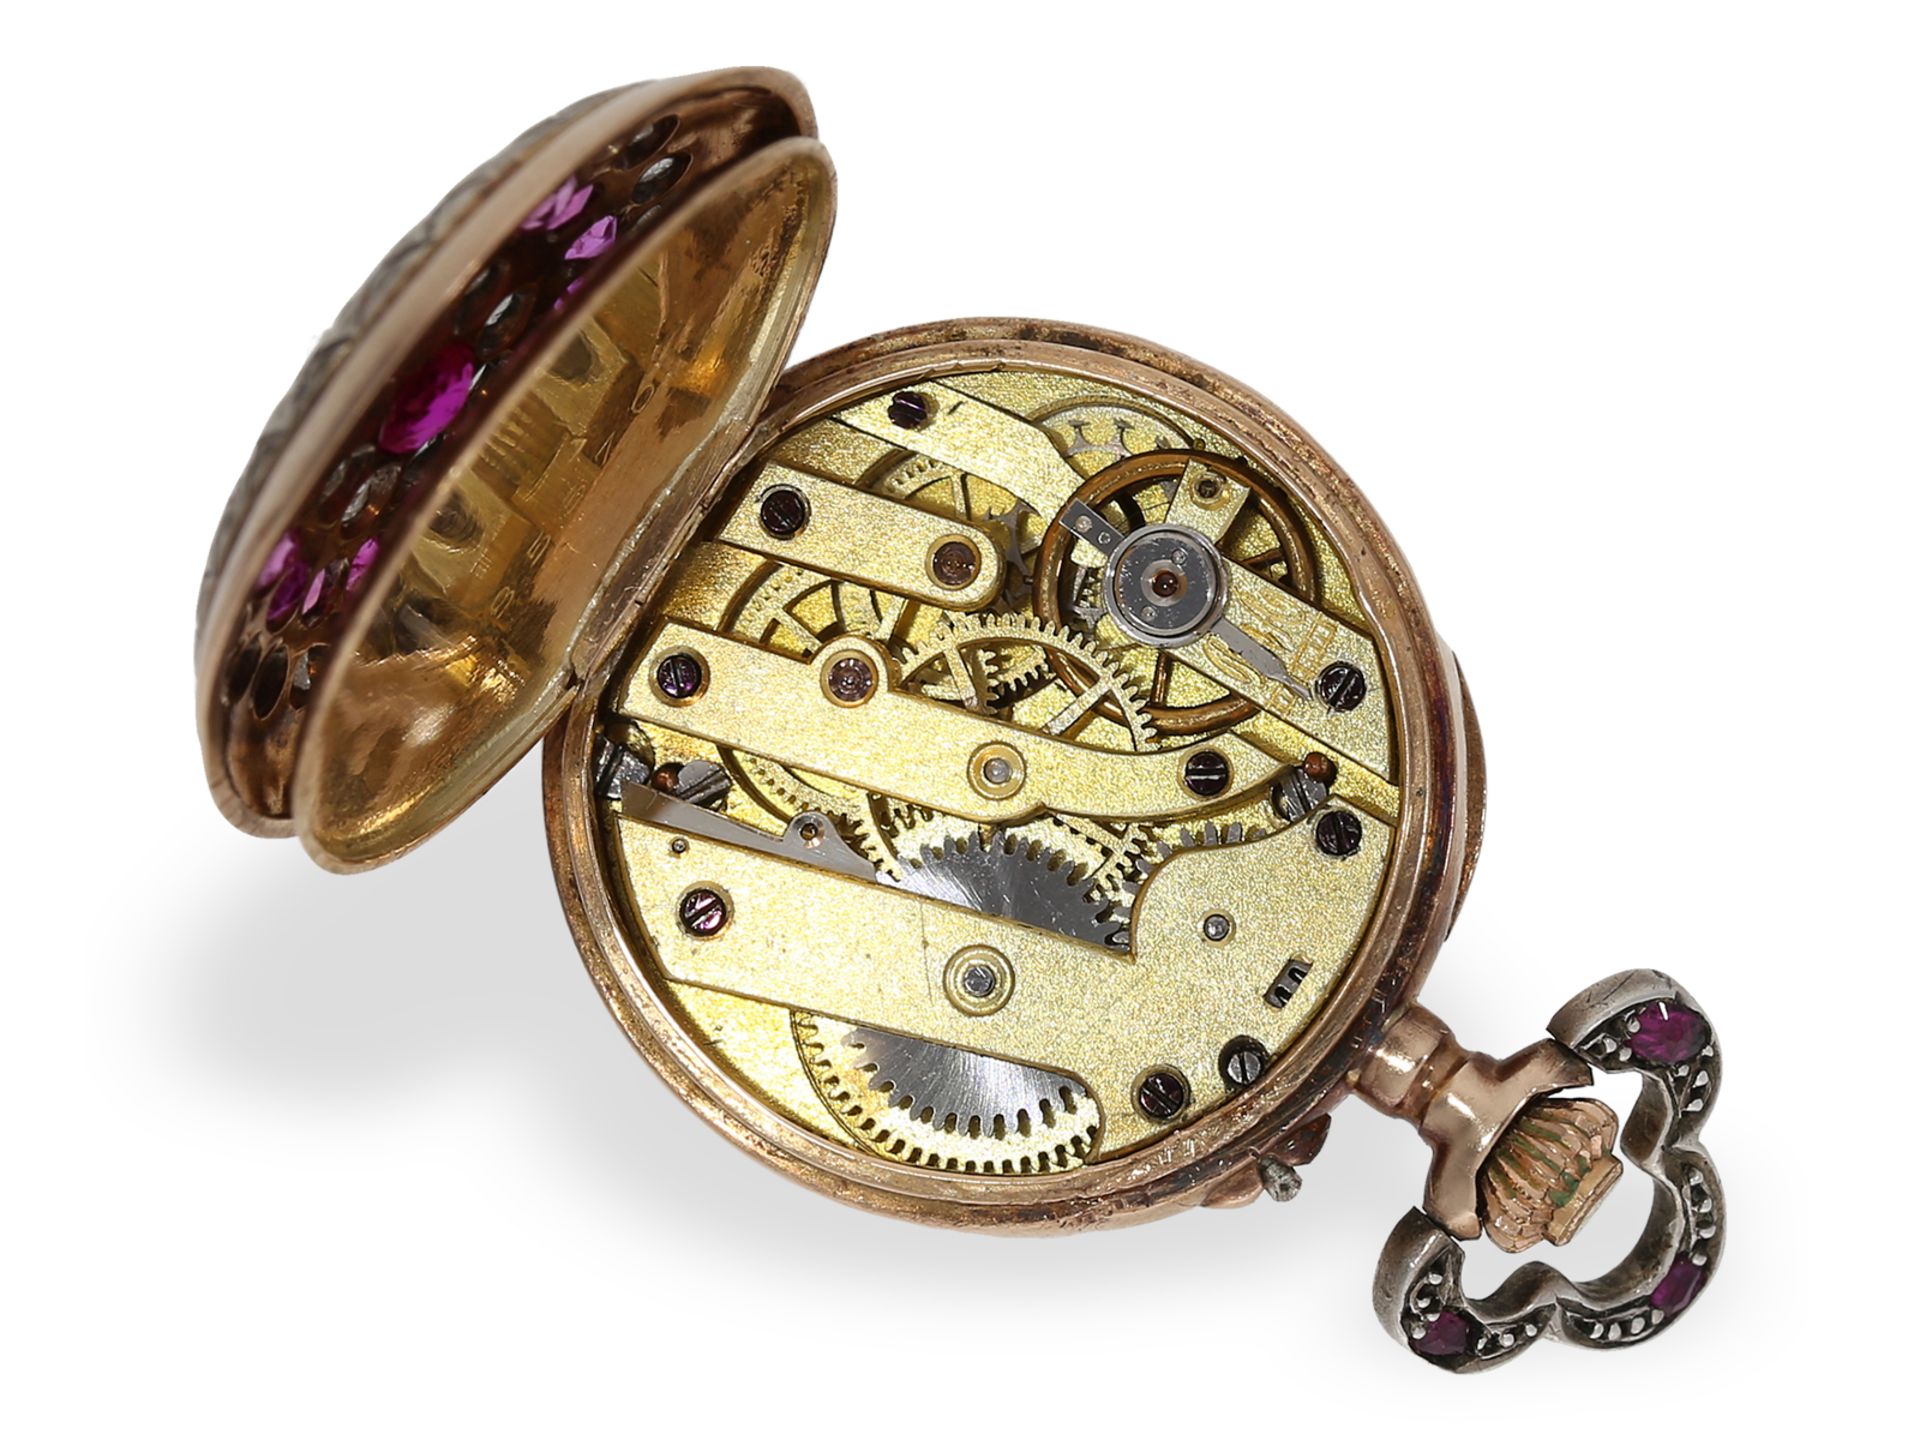 Pocket watch: rarity, miniature ladies' watch with high-quality stone setting, Lattes/ Le Coultre ar - Image 3 of 6